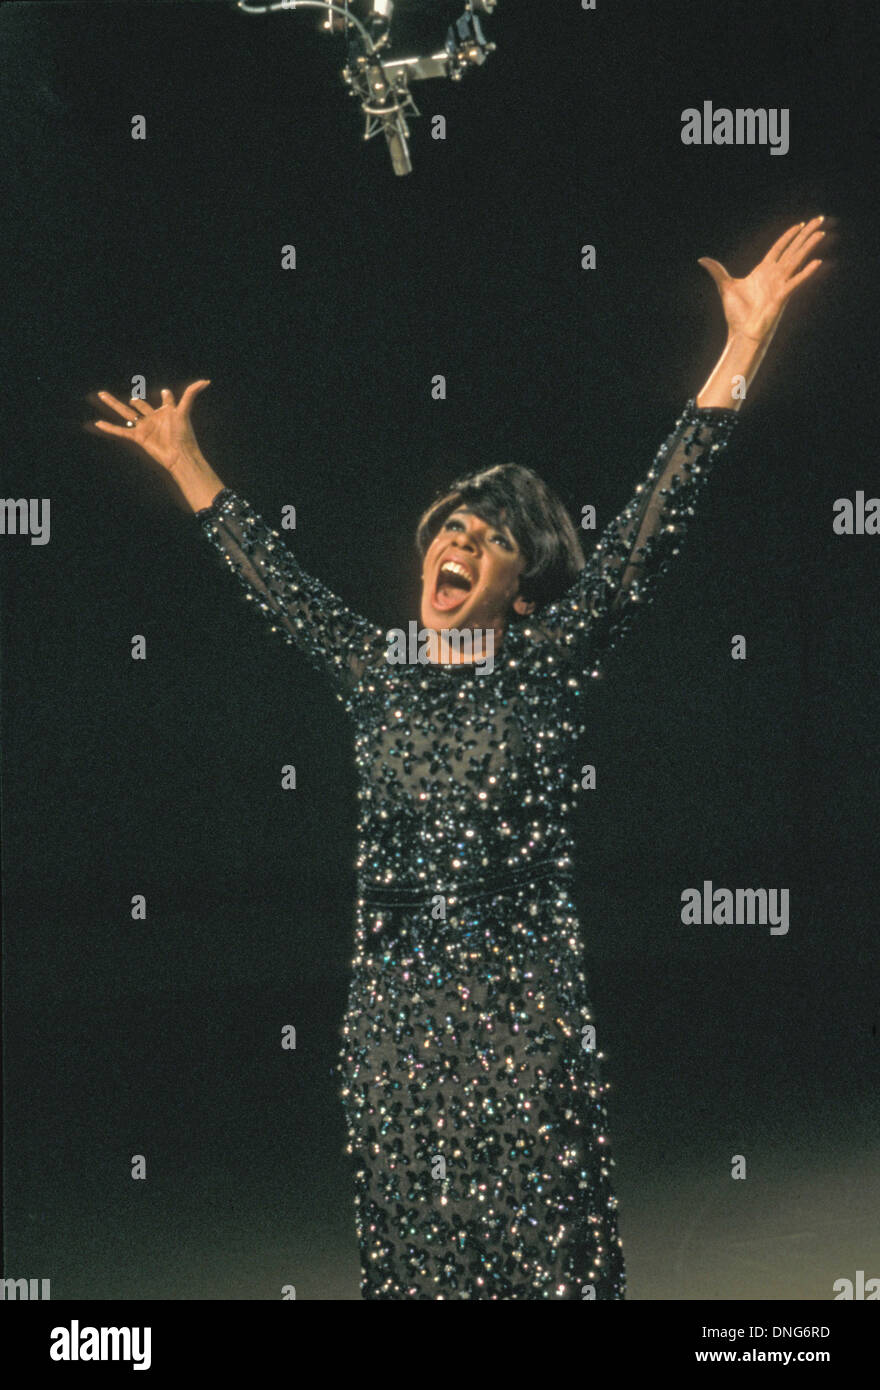 SHIRLEY BASSEY Welsh singer about 1972. Stock Photo